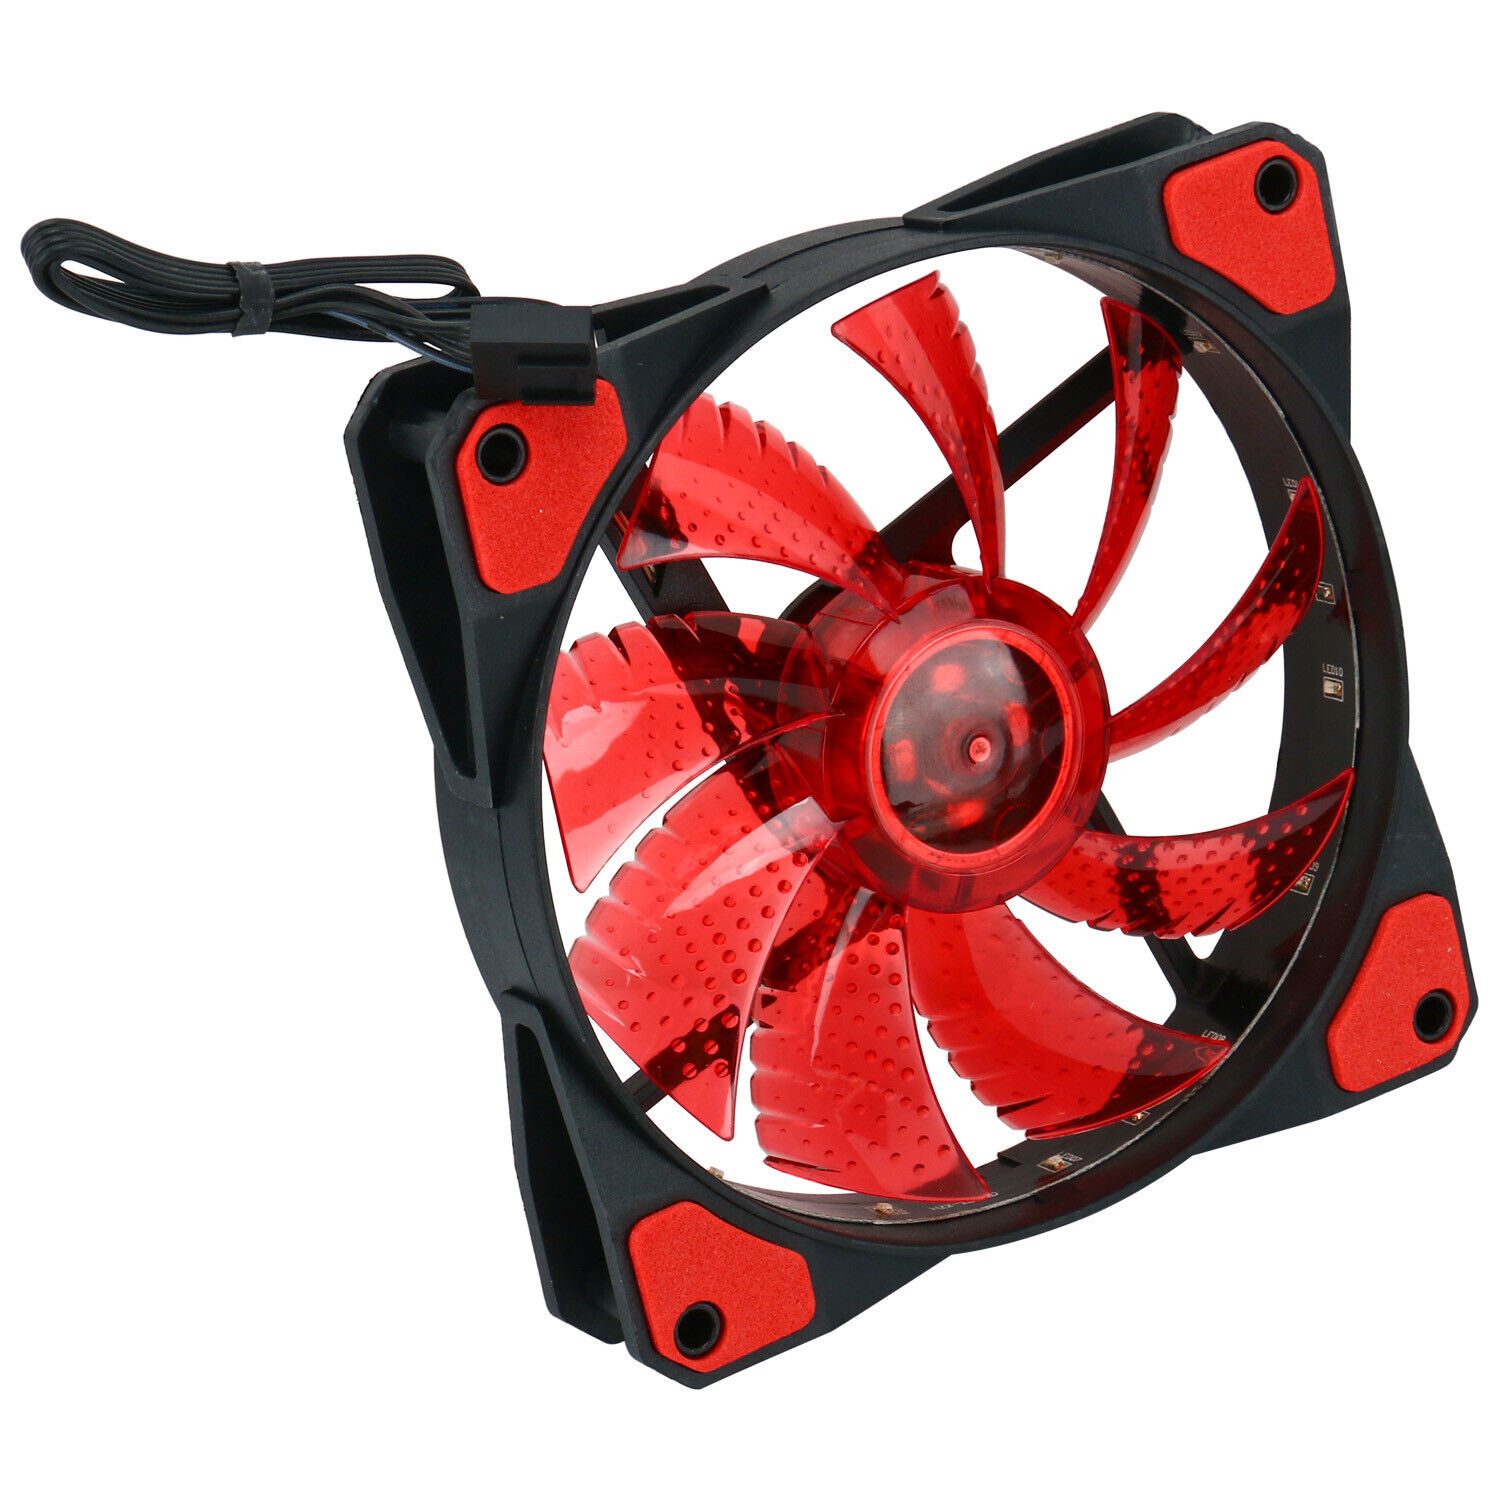 New 120mm Water Cooling CPU Cooler Row Heat Exchanger Radiator with Fan for PC